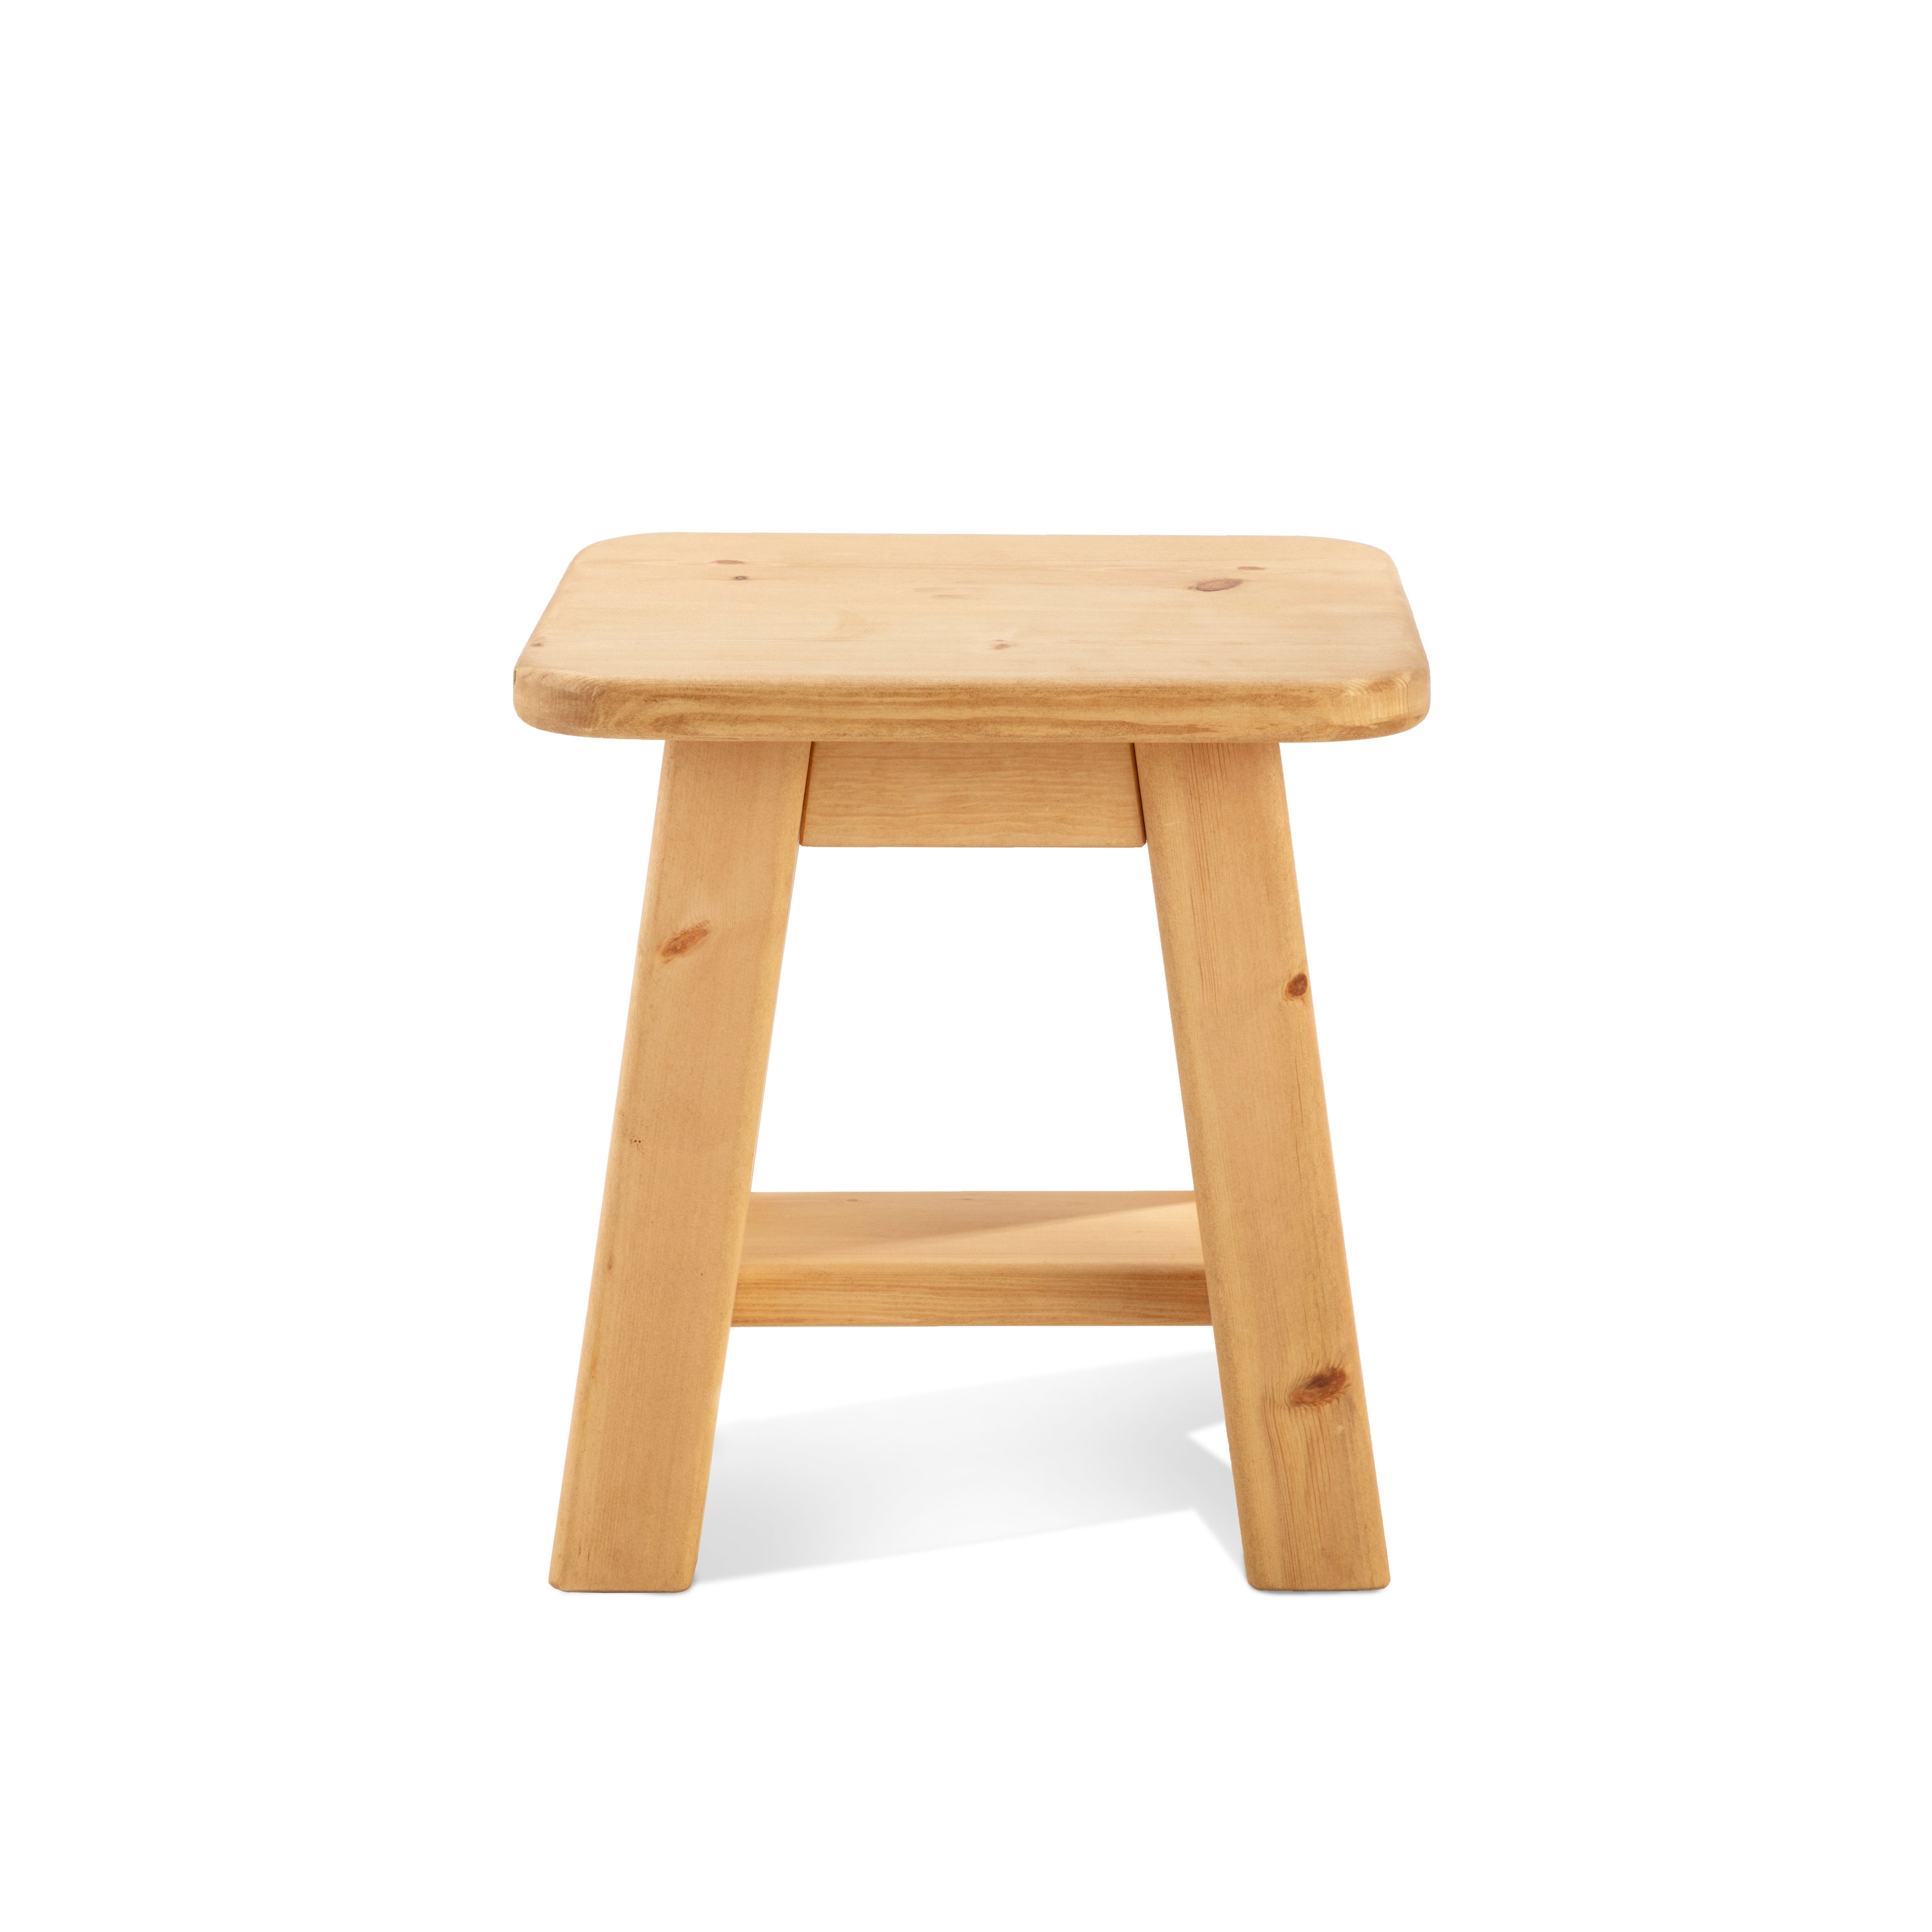 Lambton Bedside Table Stool With Shelf - Outlet - Save 15%